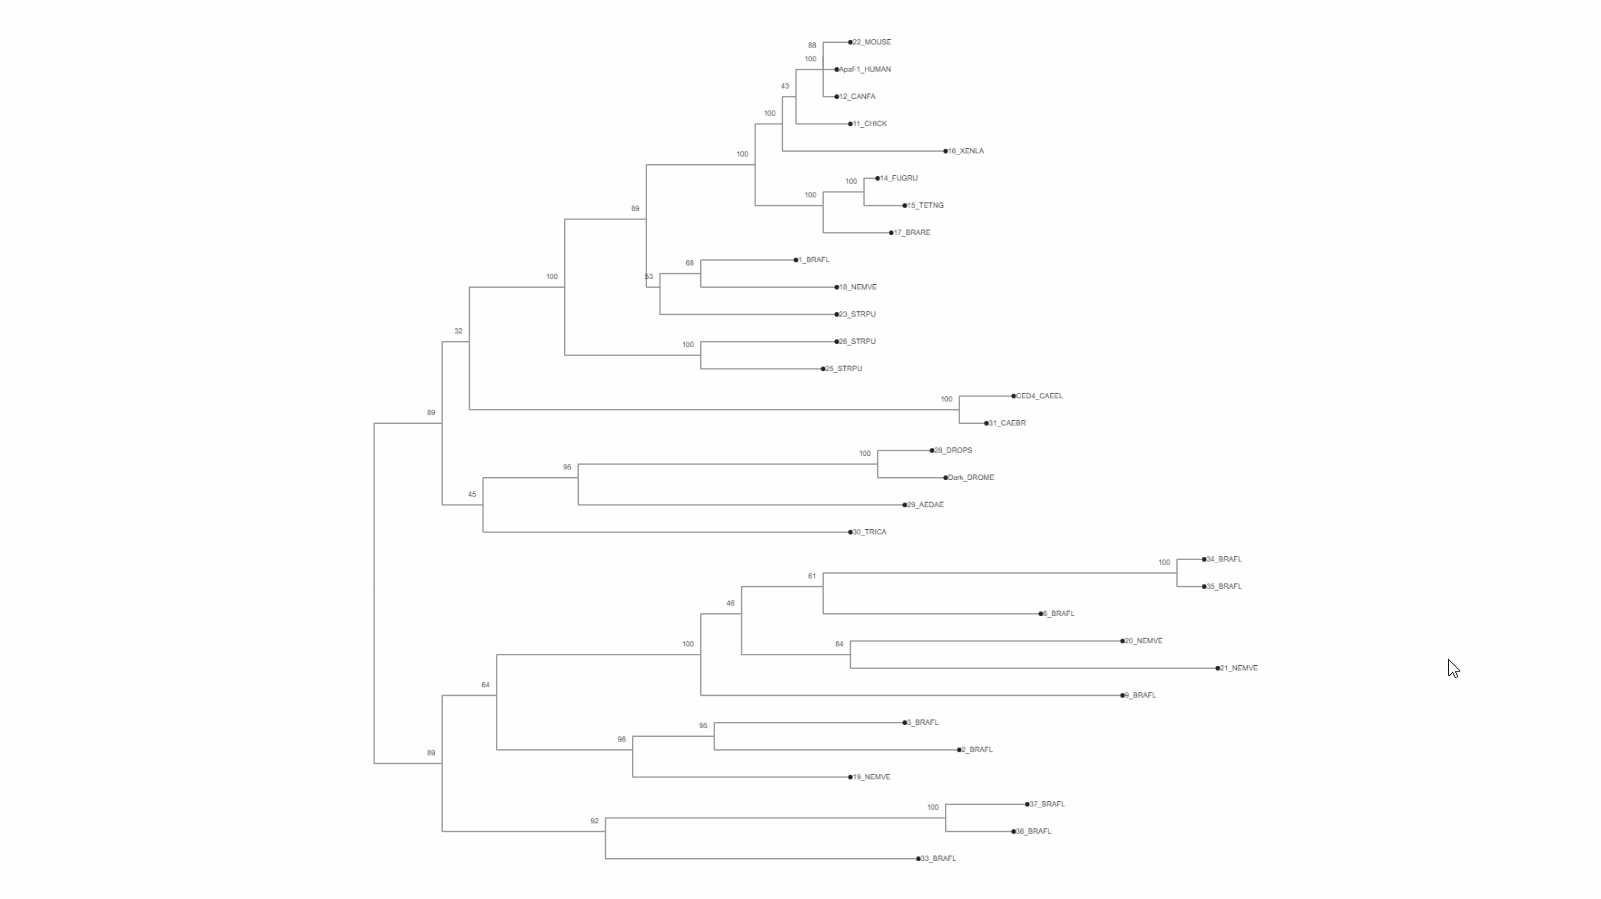 View usage-phylogeny on Github